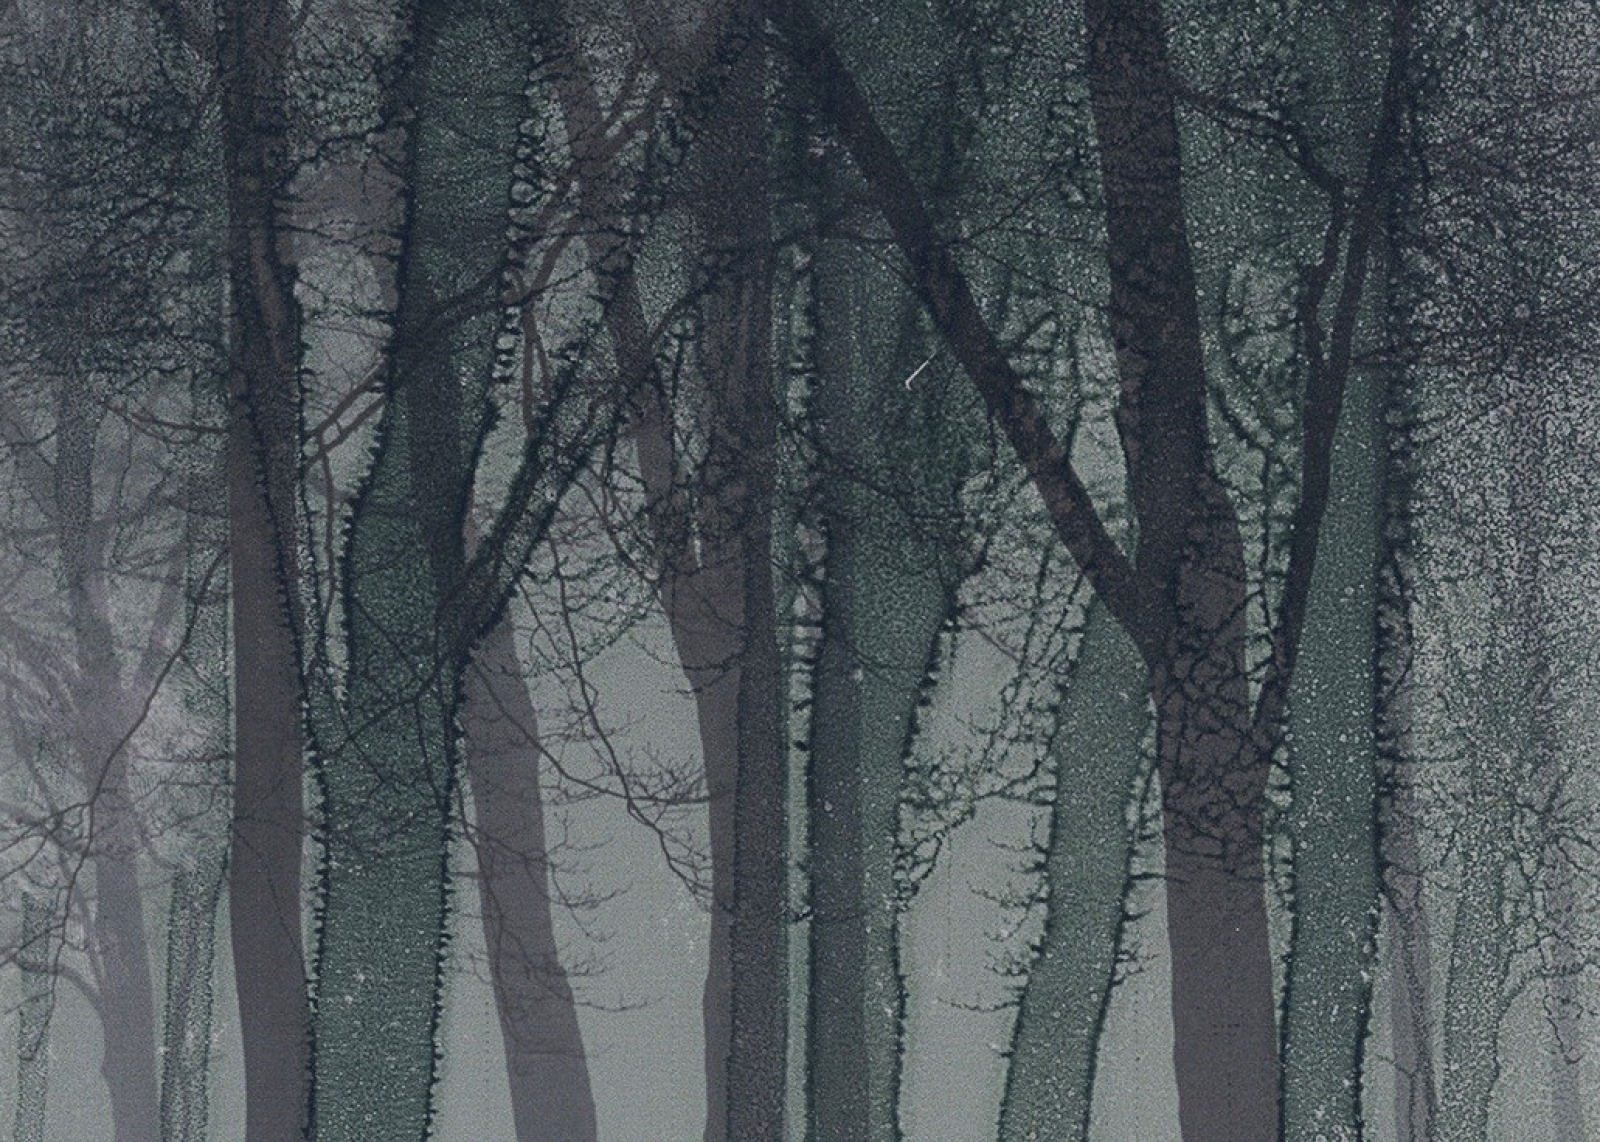 Print representing a forest